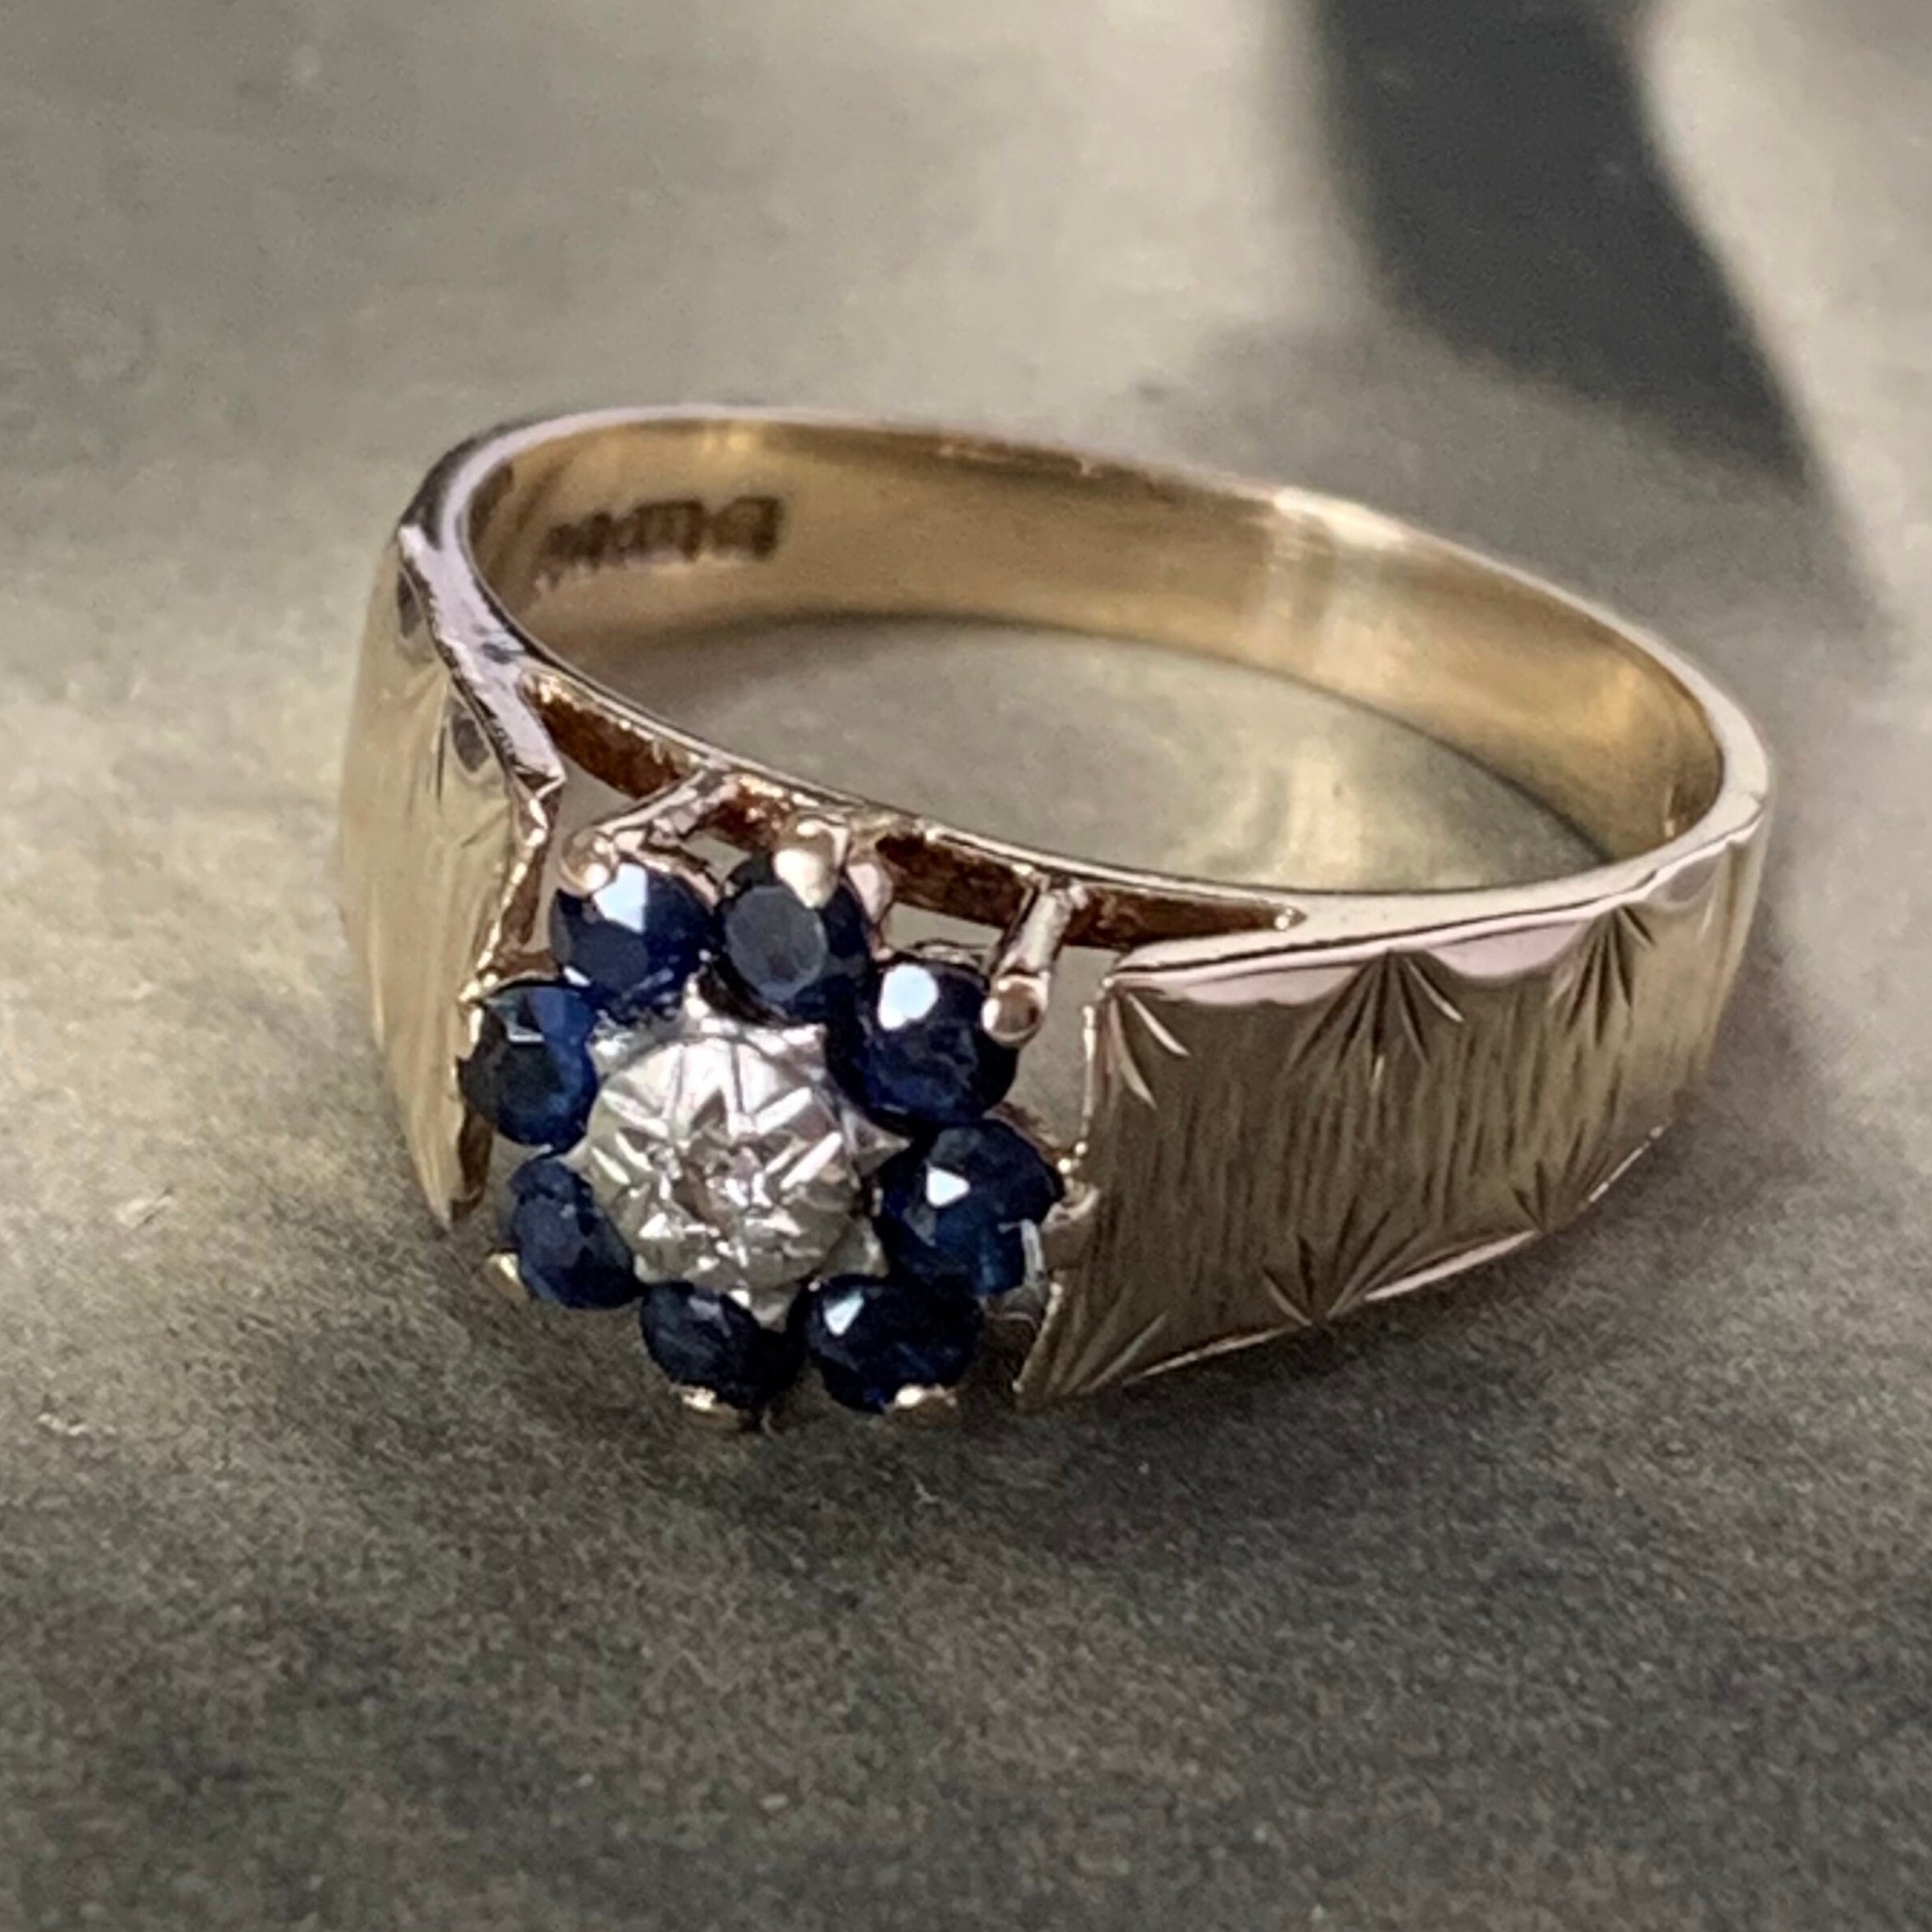 Vintage Natural Sapphire & Diamond Daisy Ring. Gemstones Are Set in 9Ct Yellow Gold. Made England With Full Hallmarks